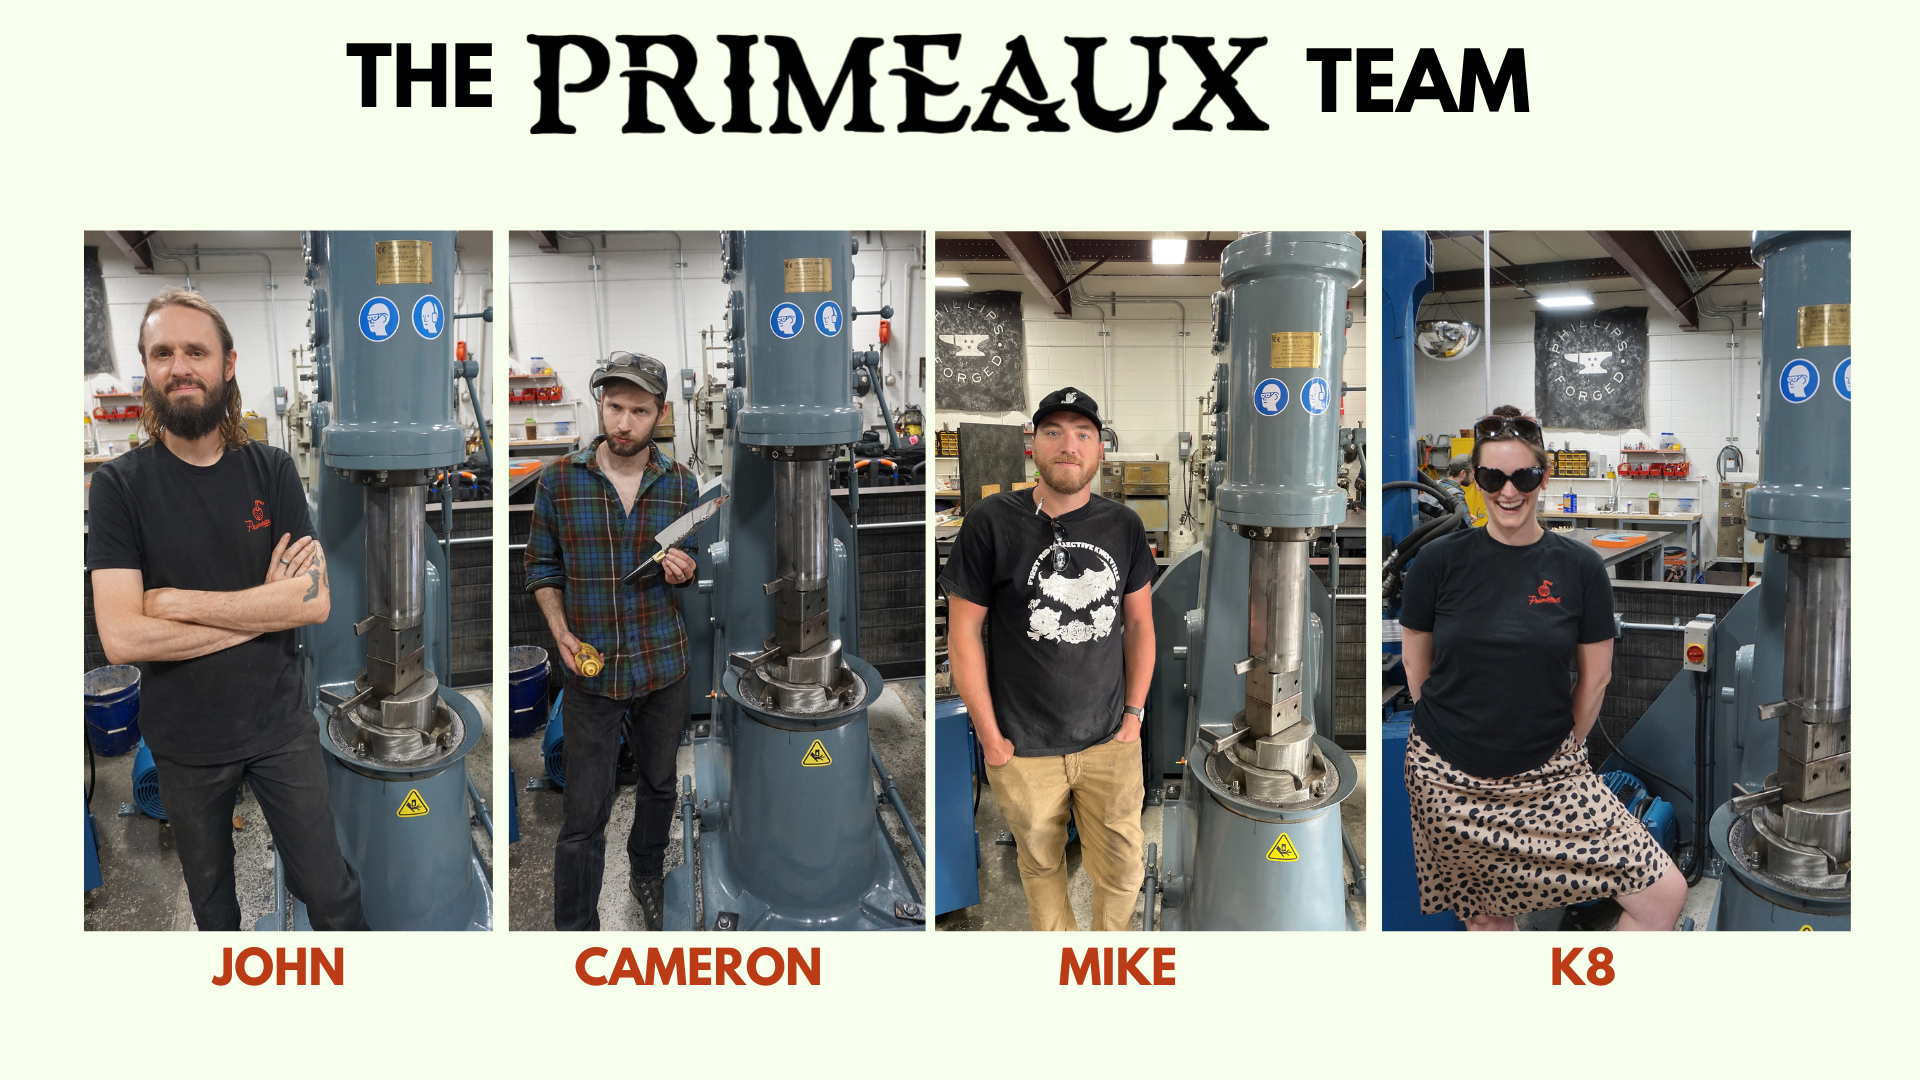 Primeaux Team Kate Cameron Mike John Phillips Chef Knife Damasteel Primeaux Goods Phillips Forged